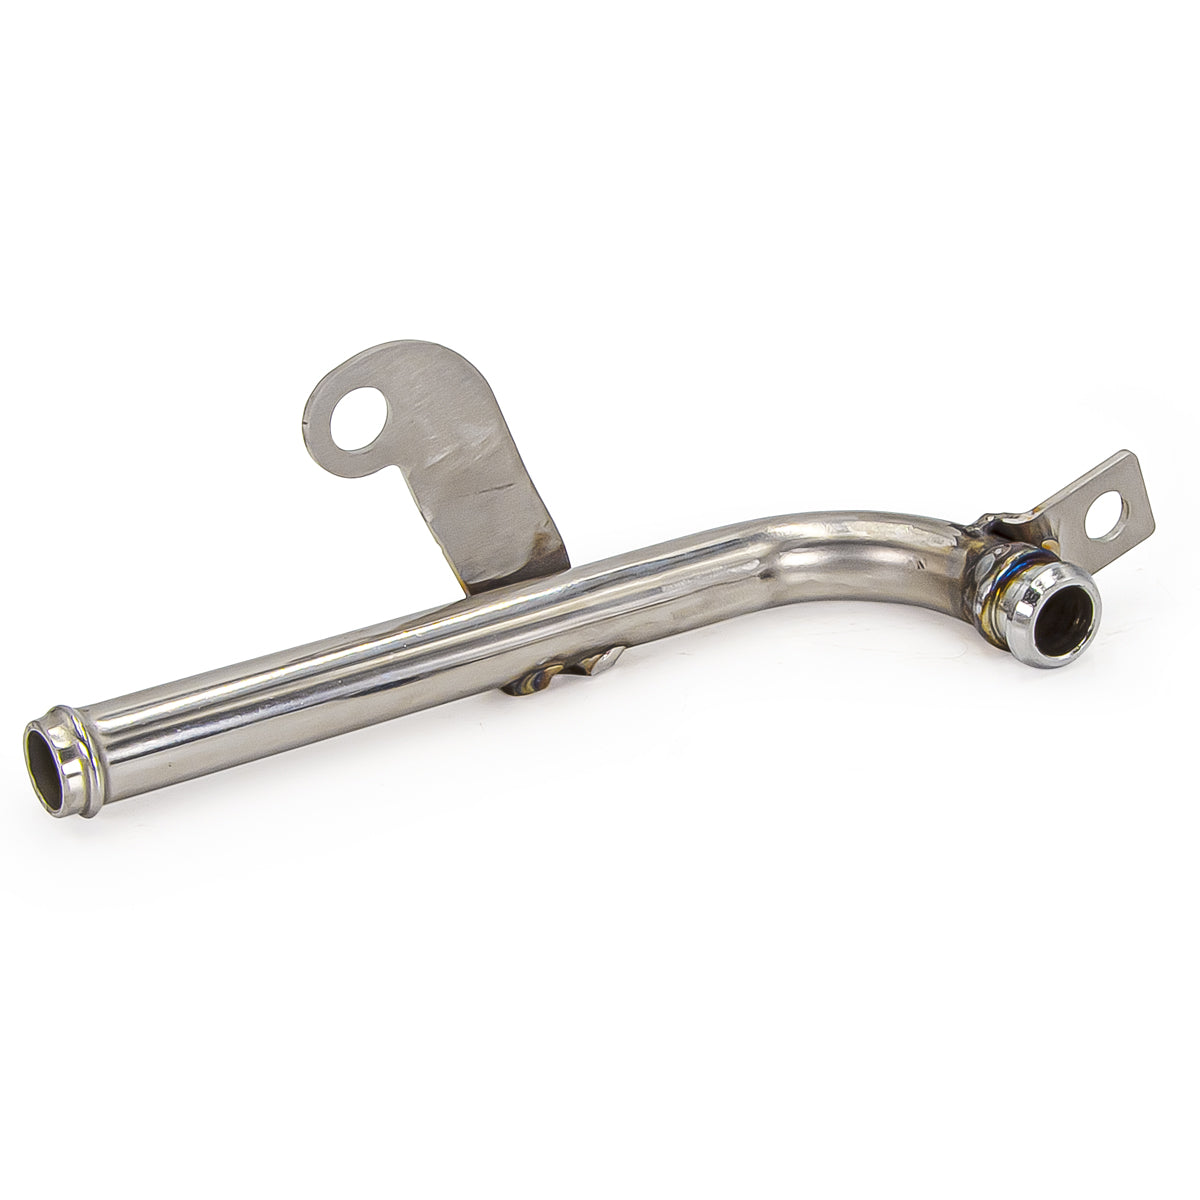 Coolant Reroute Tube - Straight (Race application) - Polished 304 Stainless Steel